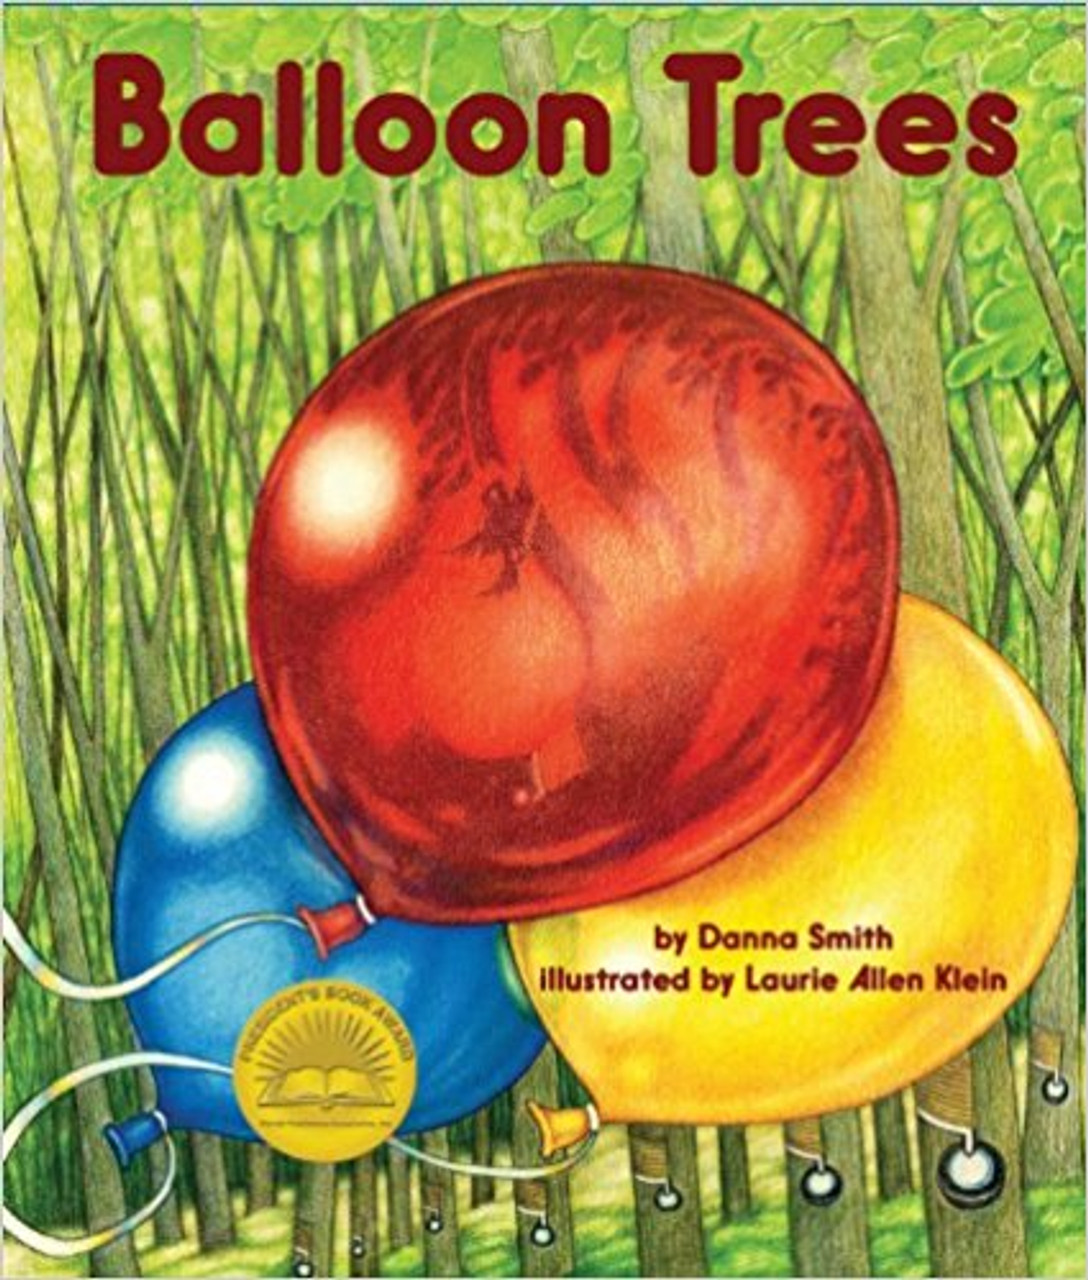 Ever wonder how a balloon is made?  Follow the journey of a balloon from its beginnings as gooey sap in a tree to its completion at a rubber factory. You'll be surprised to discover what a balloon started out as and how it becomes the bright, air-filled decoration that you enjoy today."